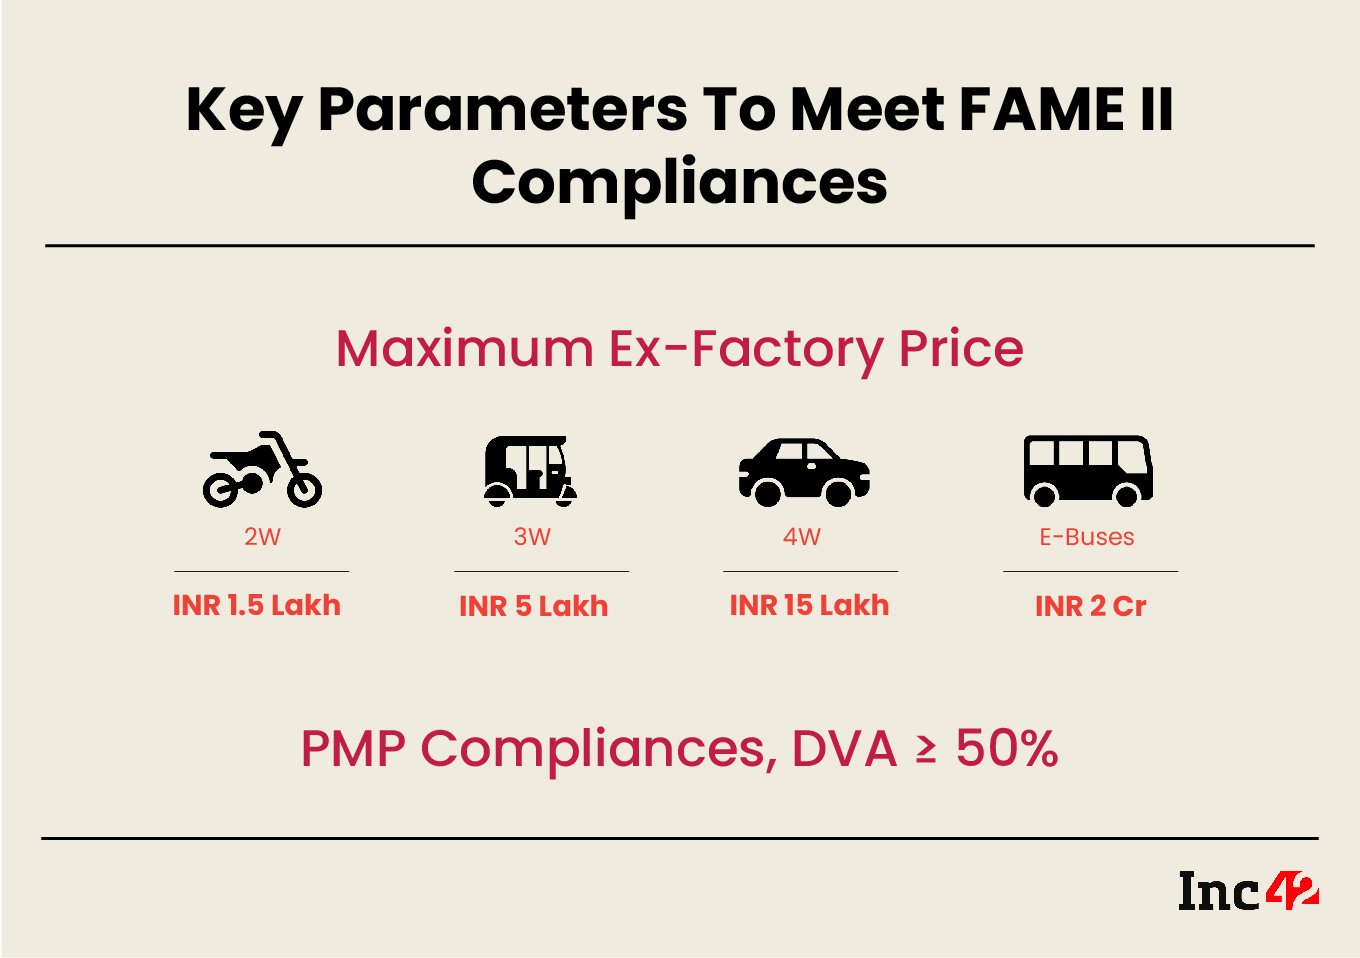 Key Paramaters to Meet FAME II Compliances